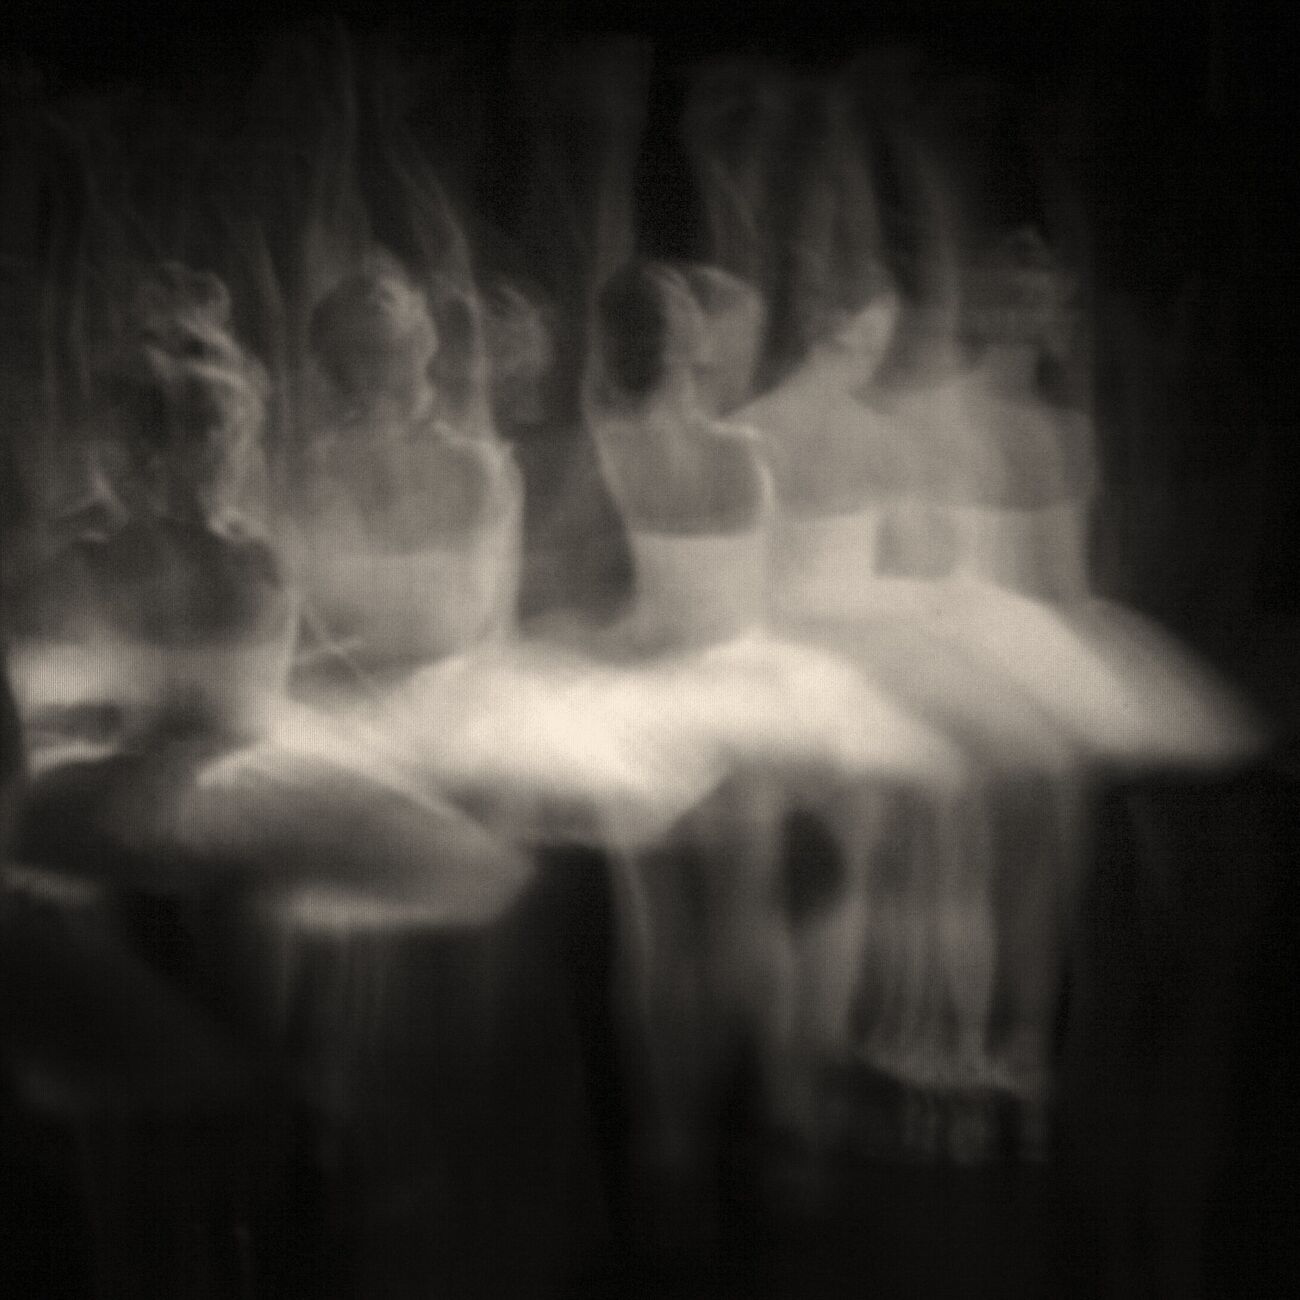 Ghost Opera, Study 17, The Swan Lake, Berlin, Allemagne. Avril 1998. Ref-867 - Denis Olivier Photographie